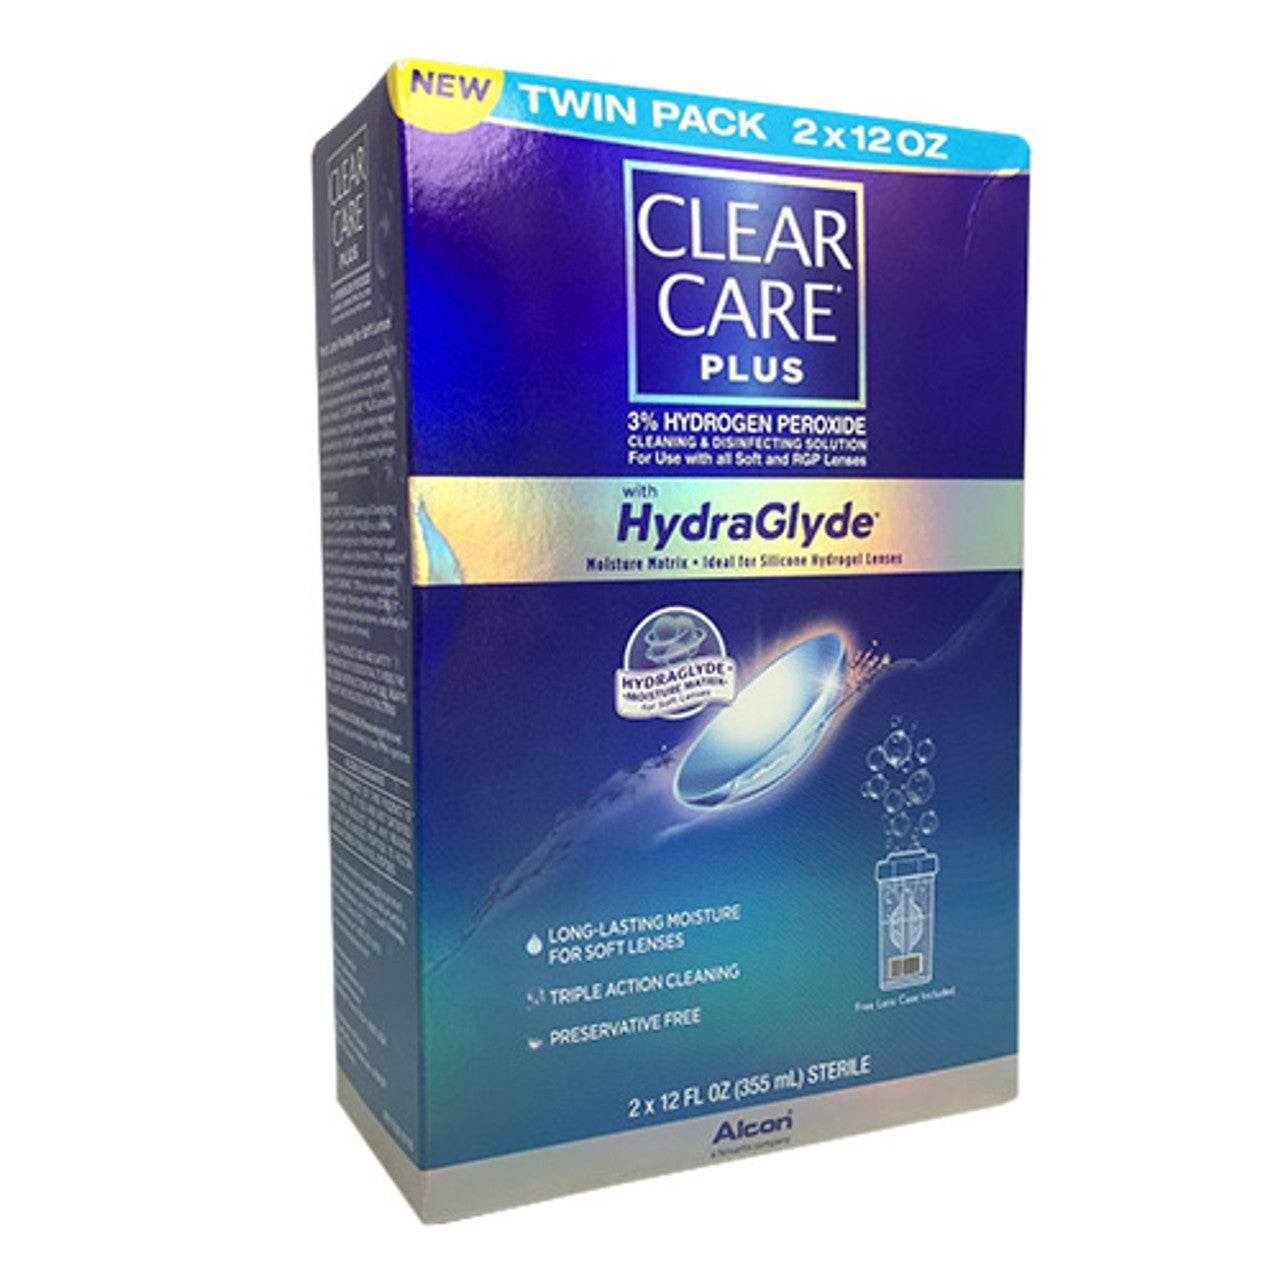 Clear Care Plus Cleaning and Disinfecting Solution With HydraGlyde - 24 oz